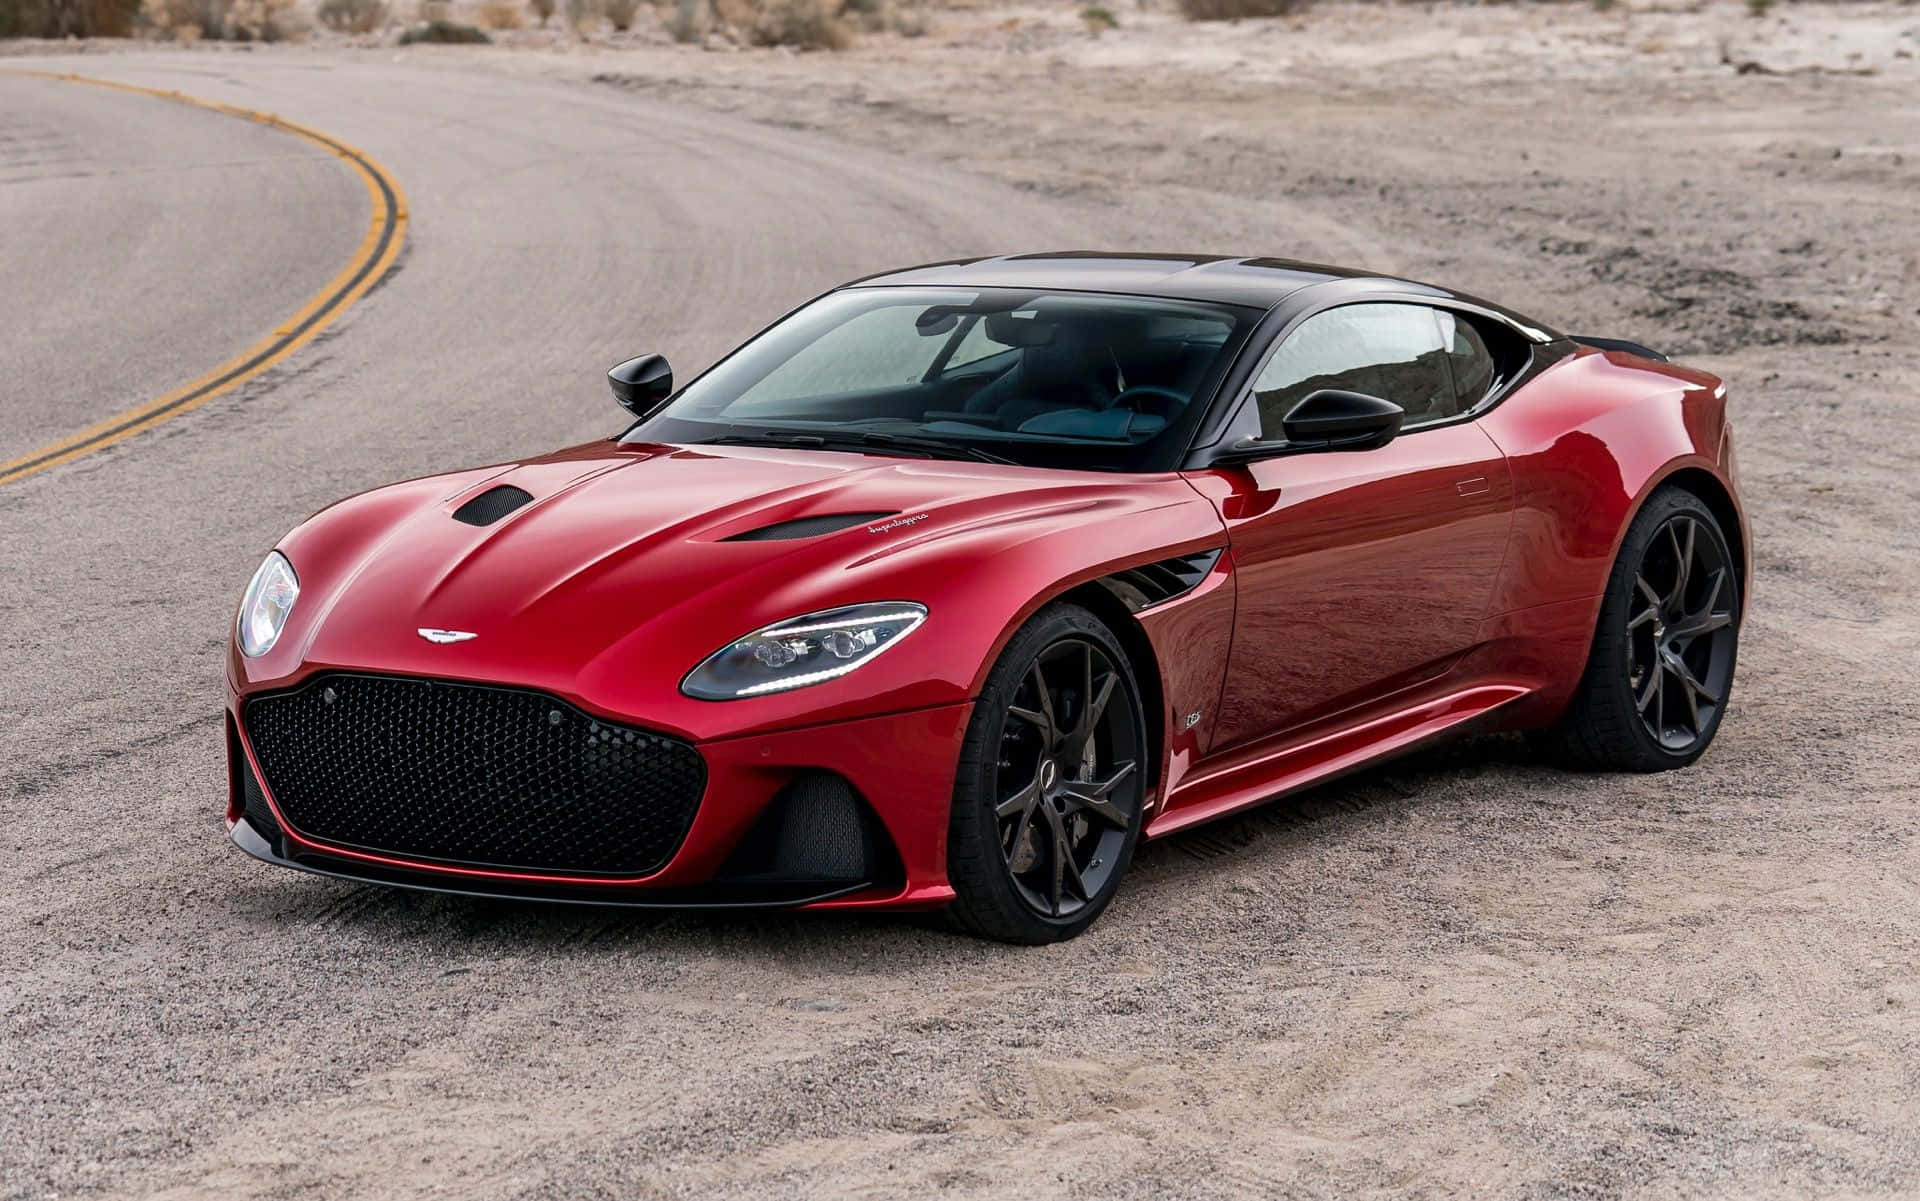 Feel the exhilaration behind the wheel of an Aston Martin